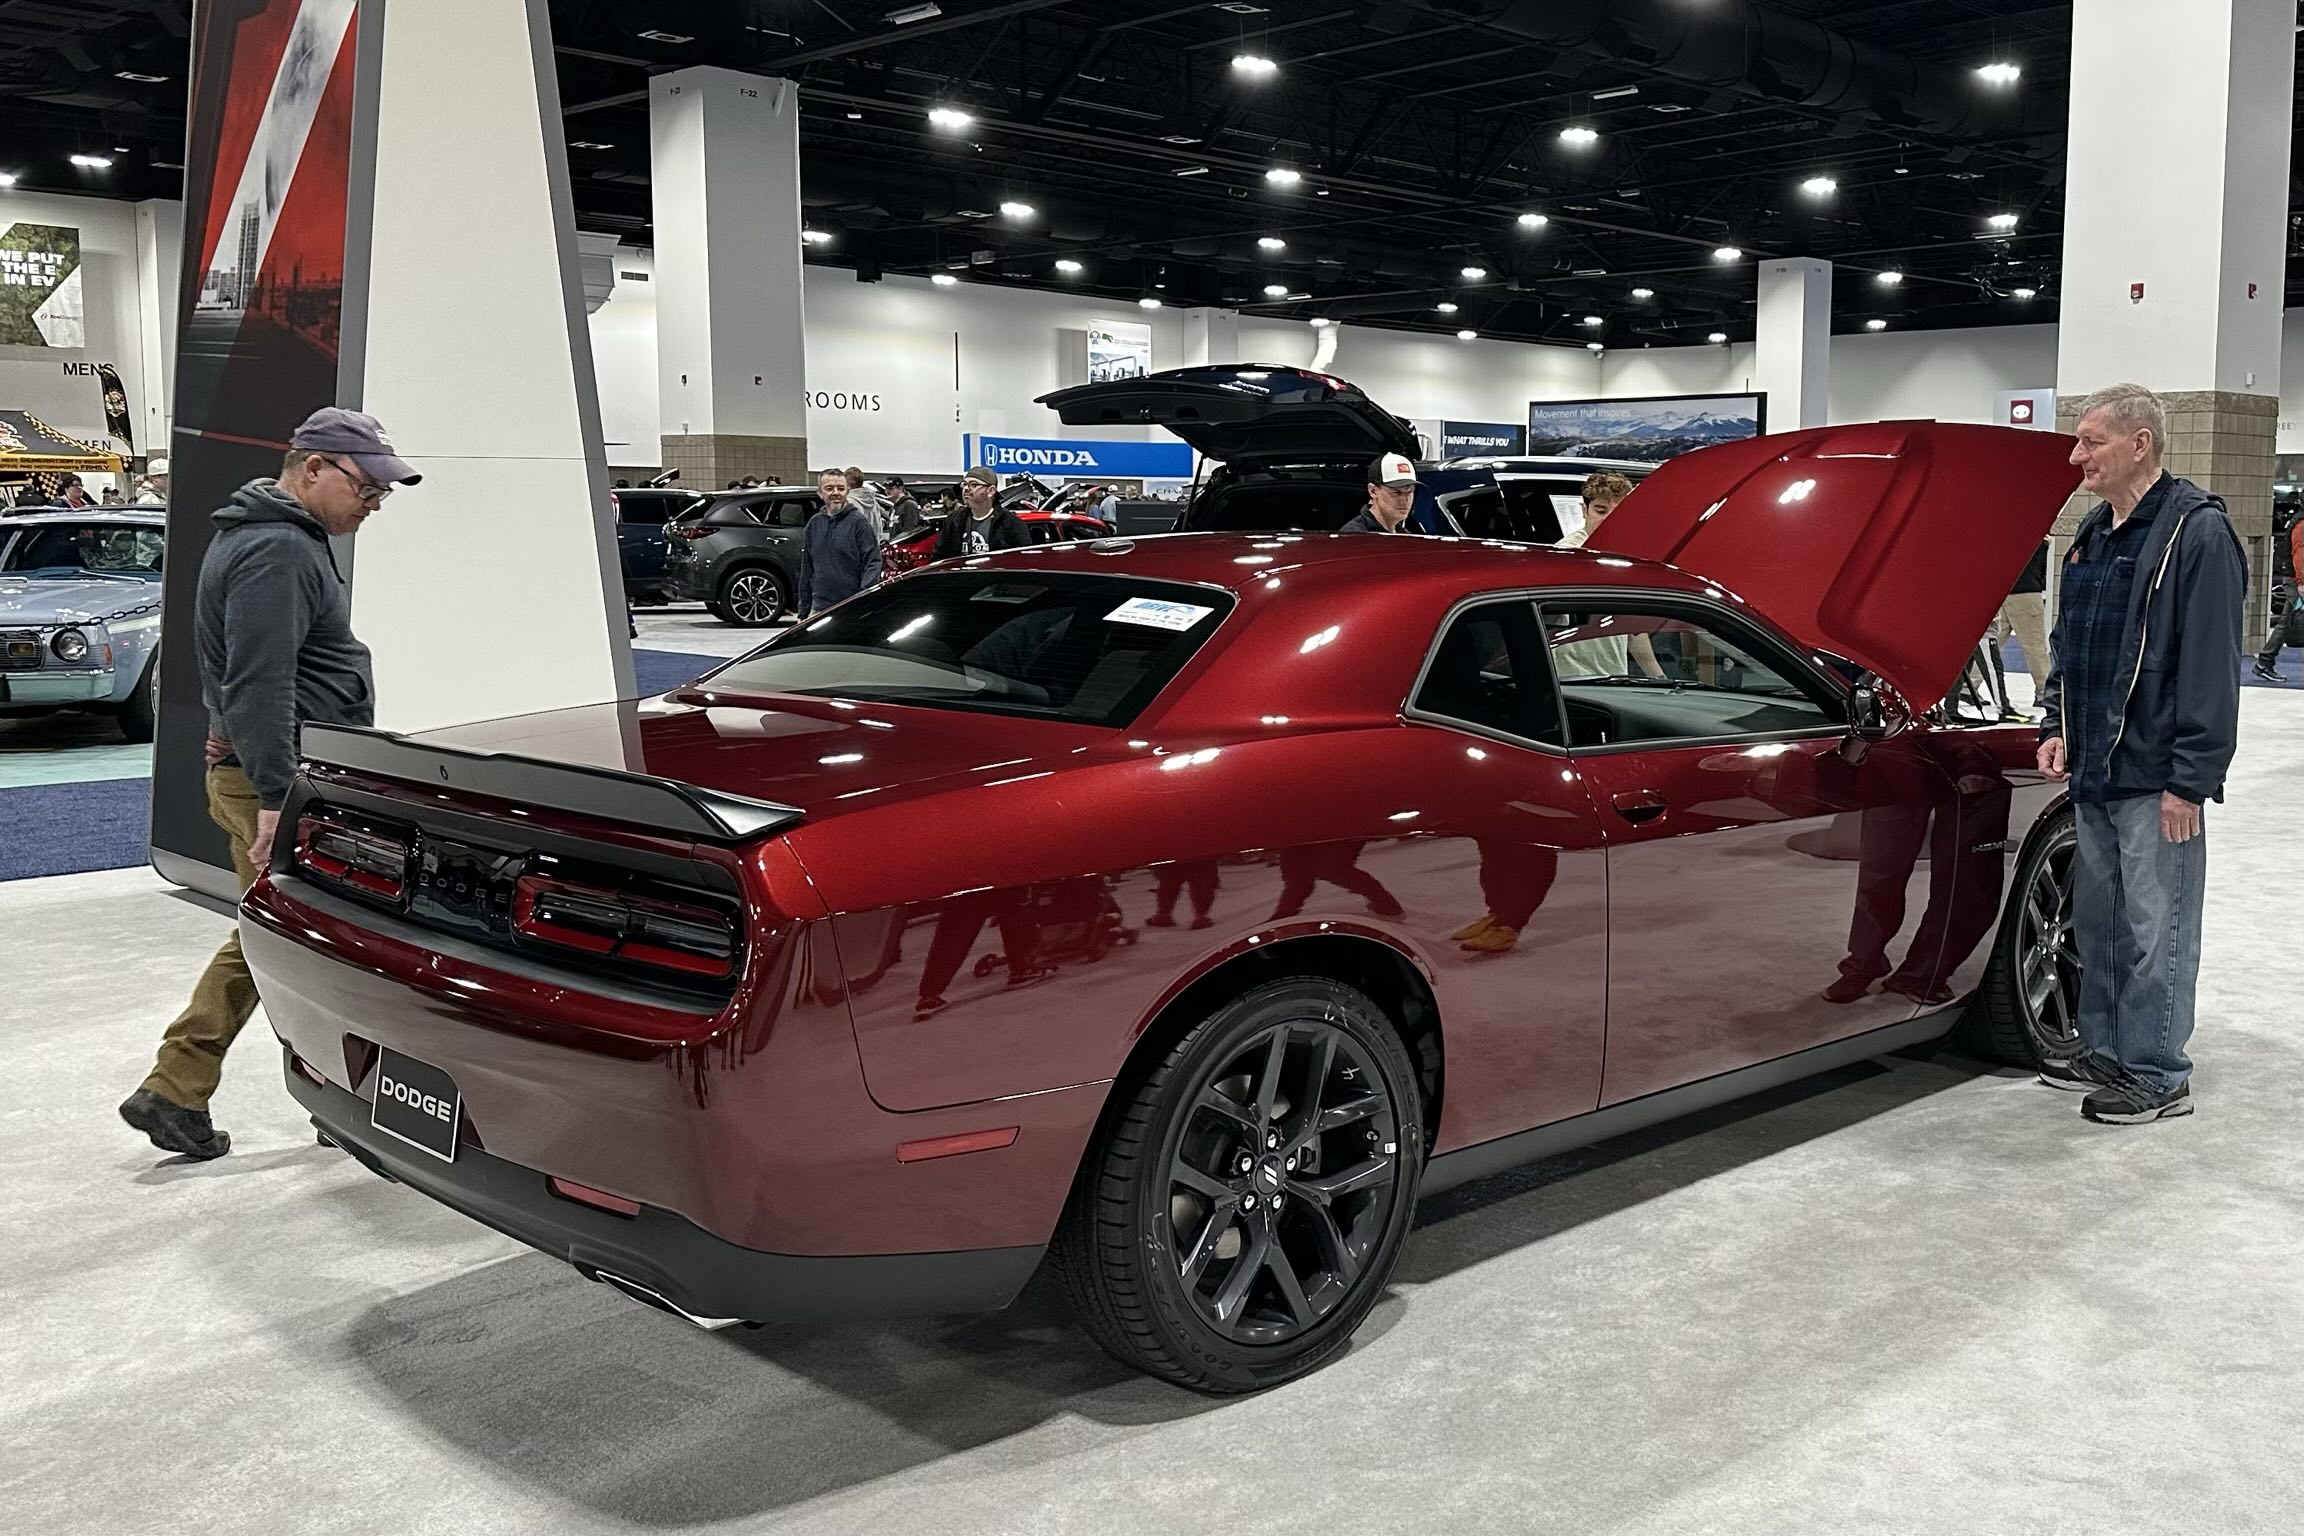 A red Dodge Challenger with a HEMI engine.